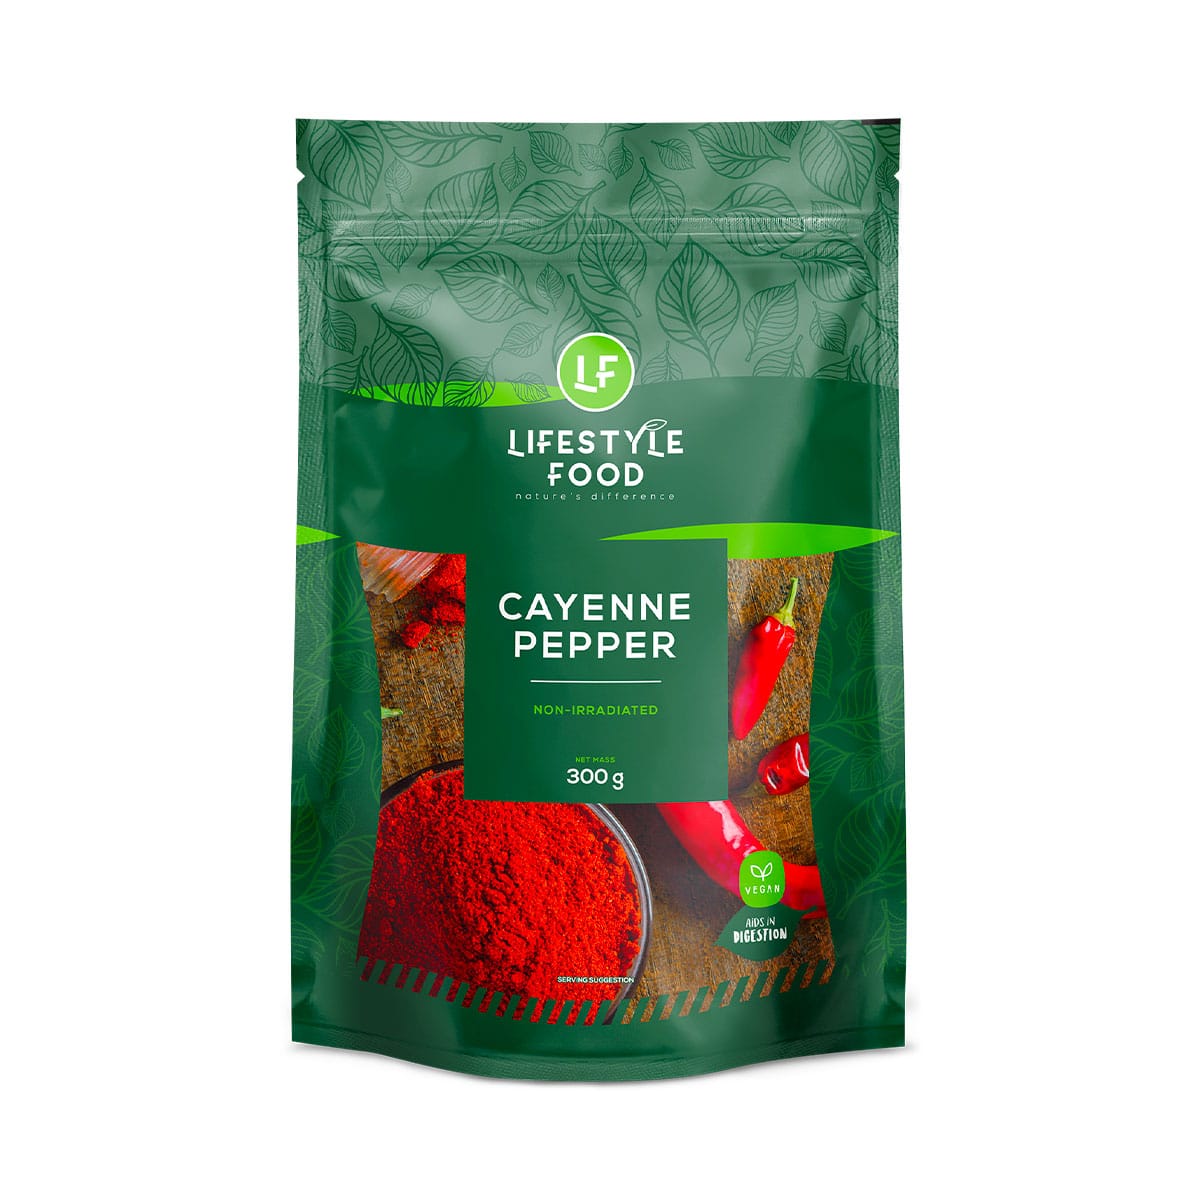 Lifestyle Food Cayenne Pepper Refill Non-Irradiated - 300g